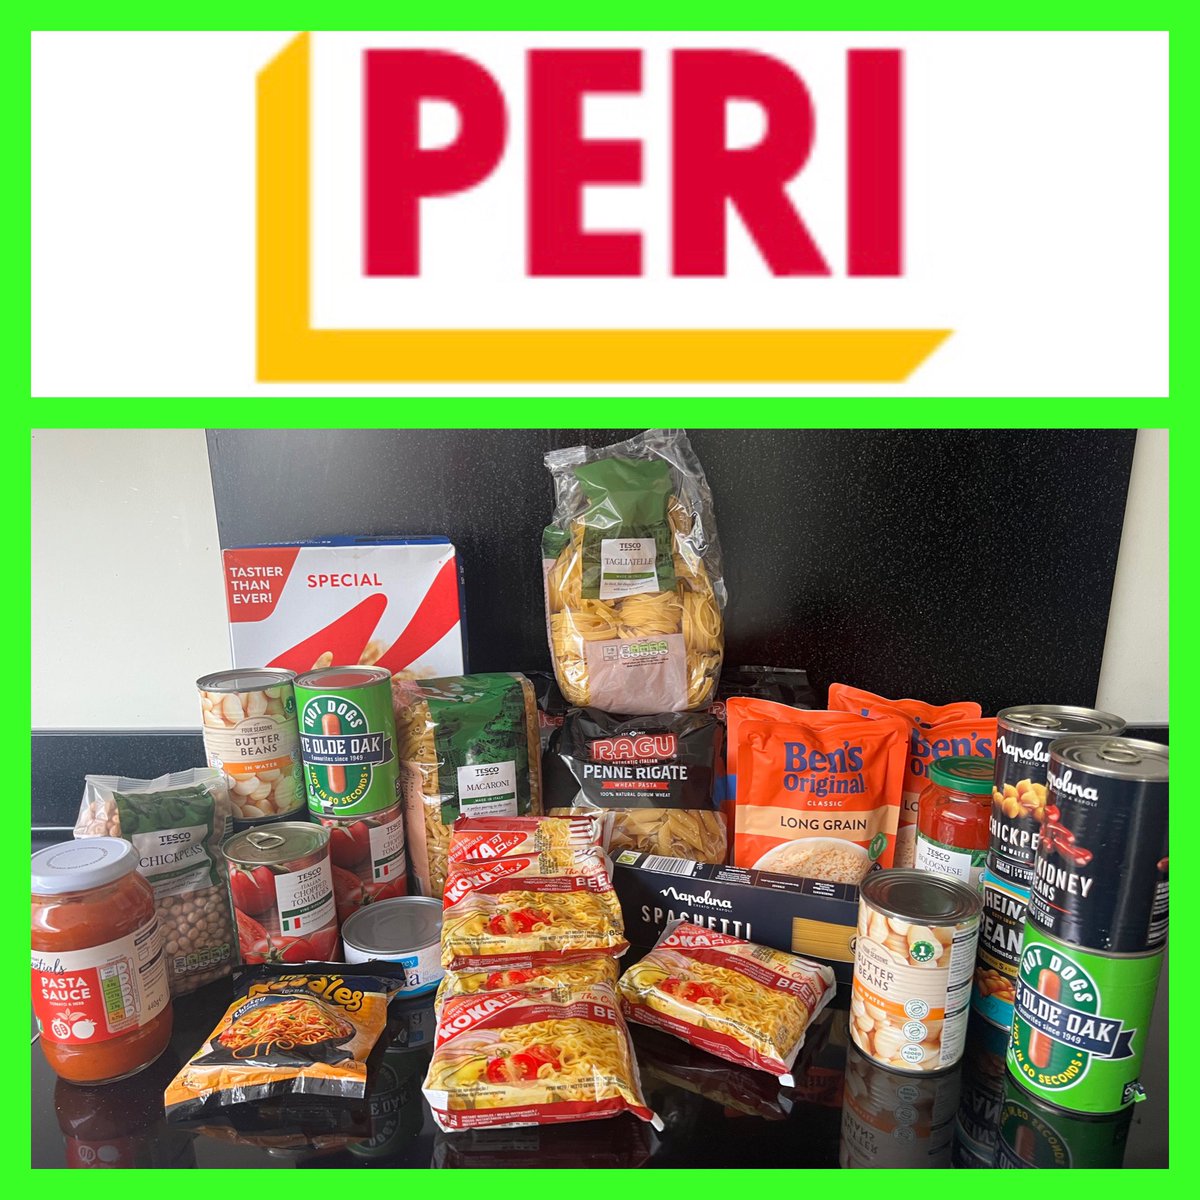 Thank you to everyone PERI Brentwood for another fantastic donation of food for the clients of @Brentwood_Fb 

It is only with the support of our local community that we are able to provide emergency food and signposting to those referred to us in crisis.

💚Thank You💚